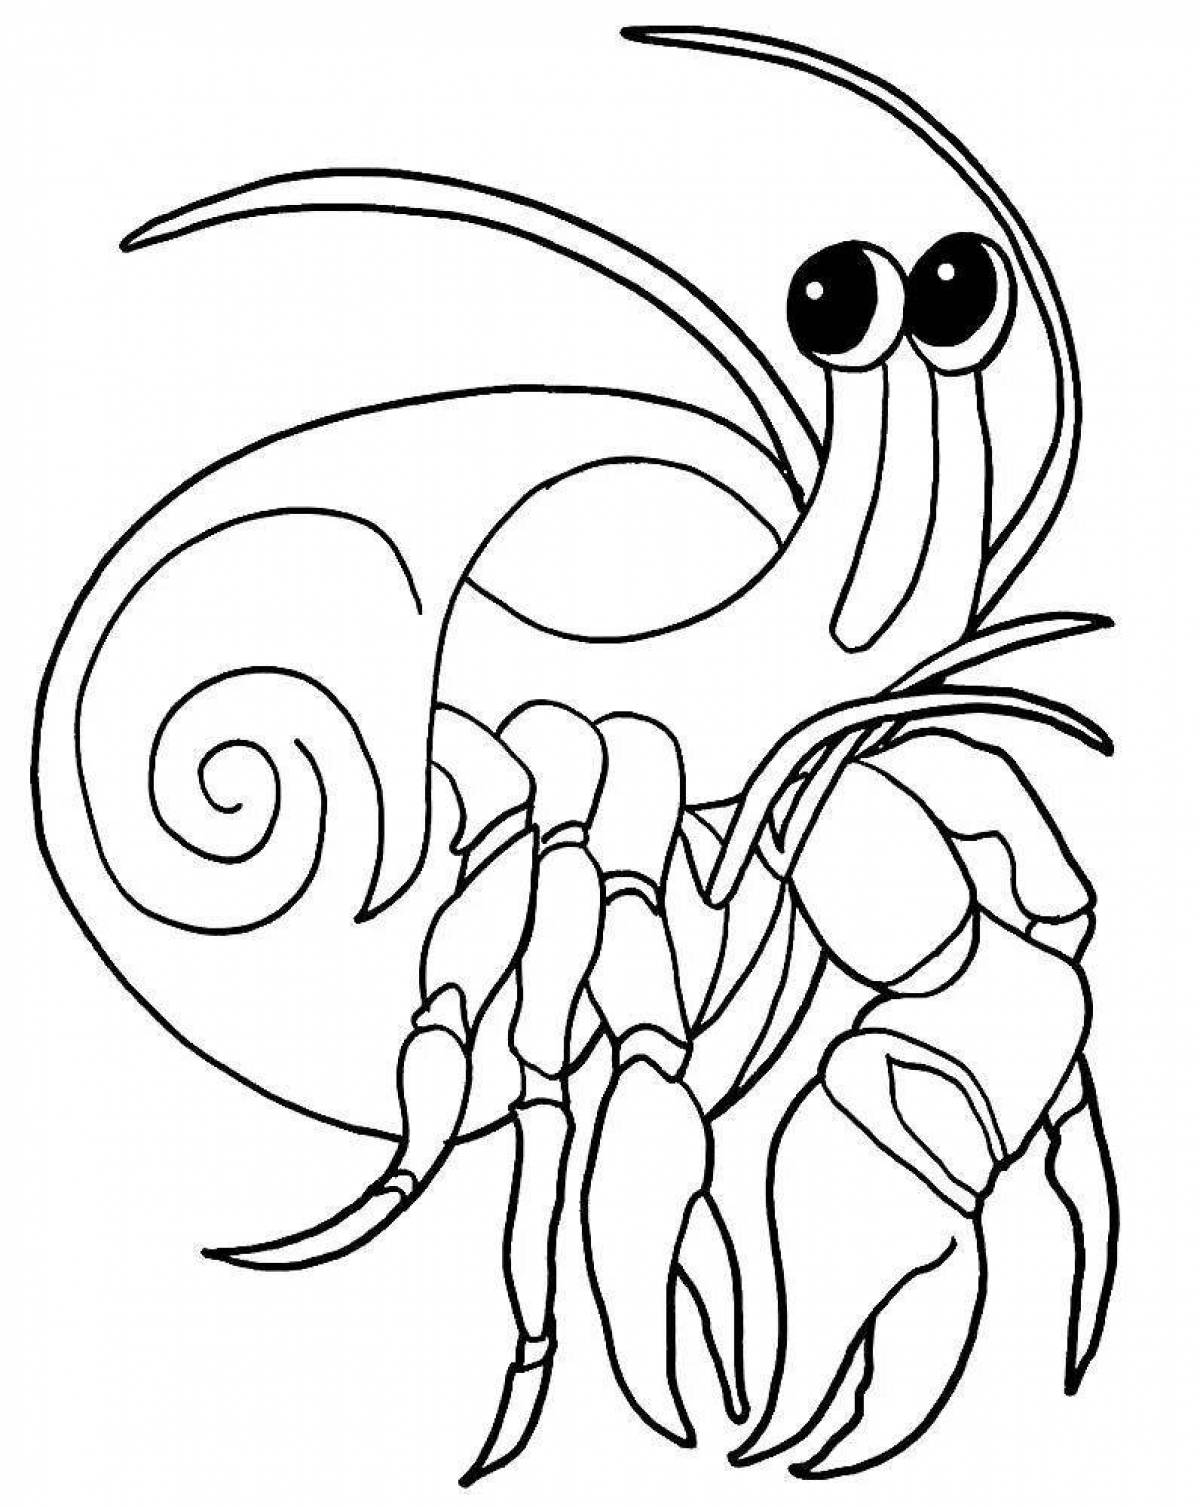 Coloring page holiday hermit crab